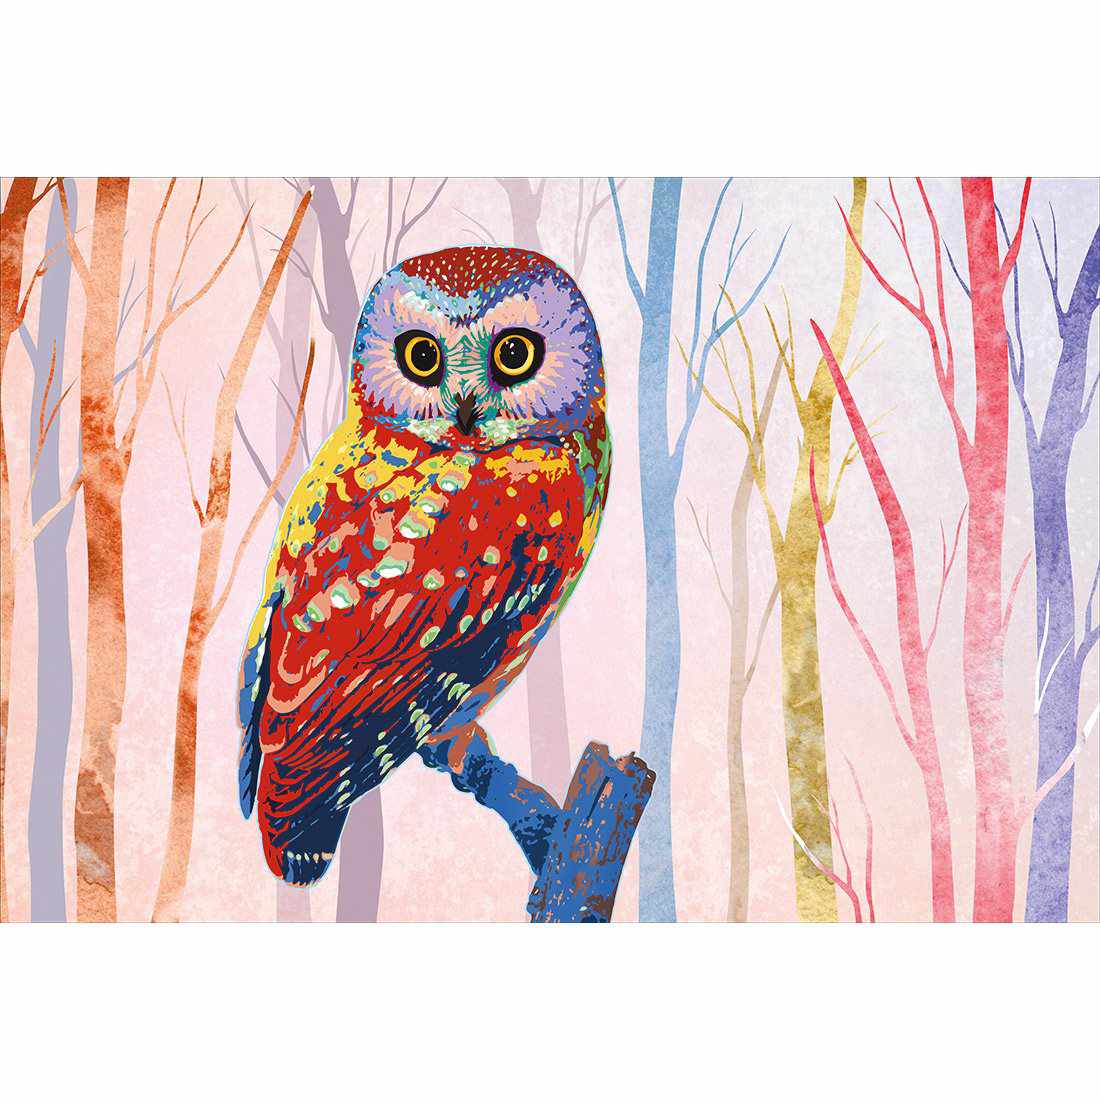 Bright Wise Owl, Light Canvas Art-Canvas-Wall Art Designs-45x30cm-Canvas - No Frame-Wall Art Designs